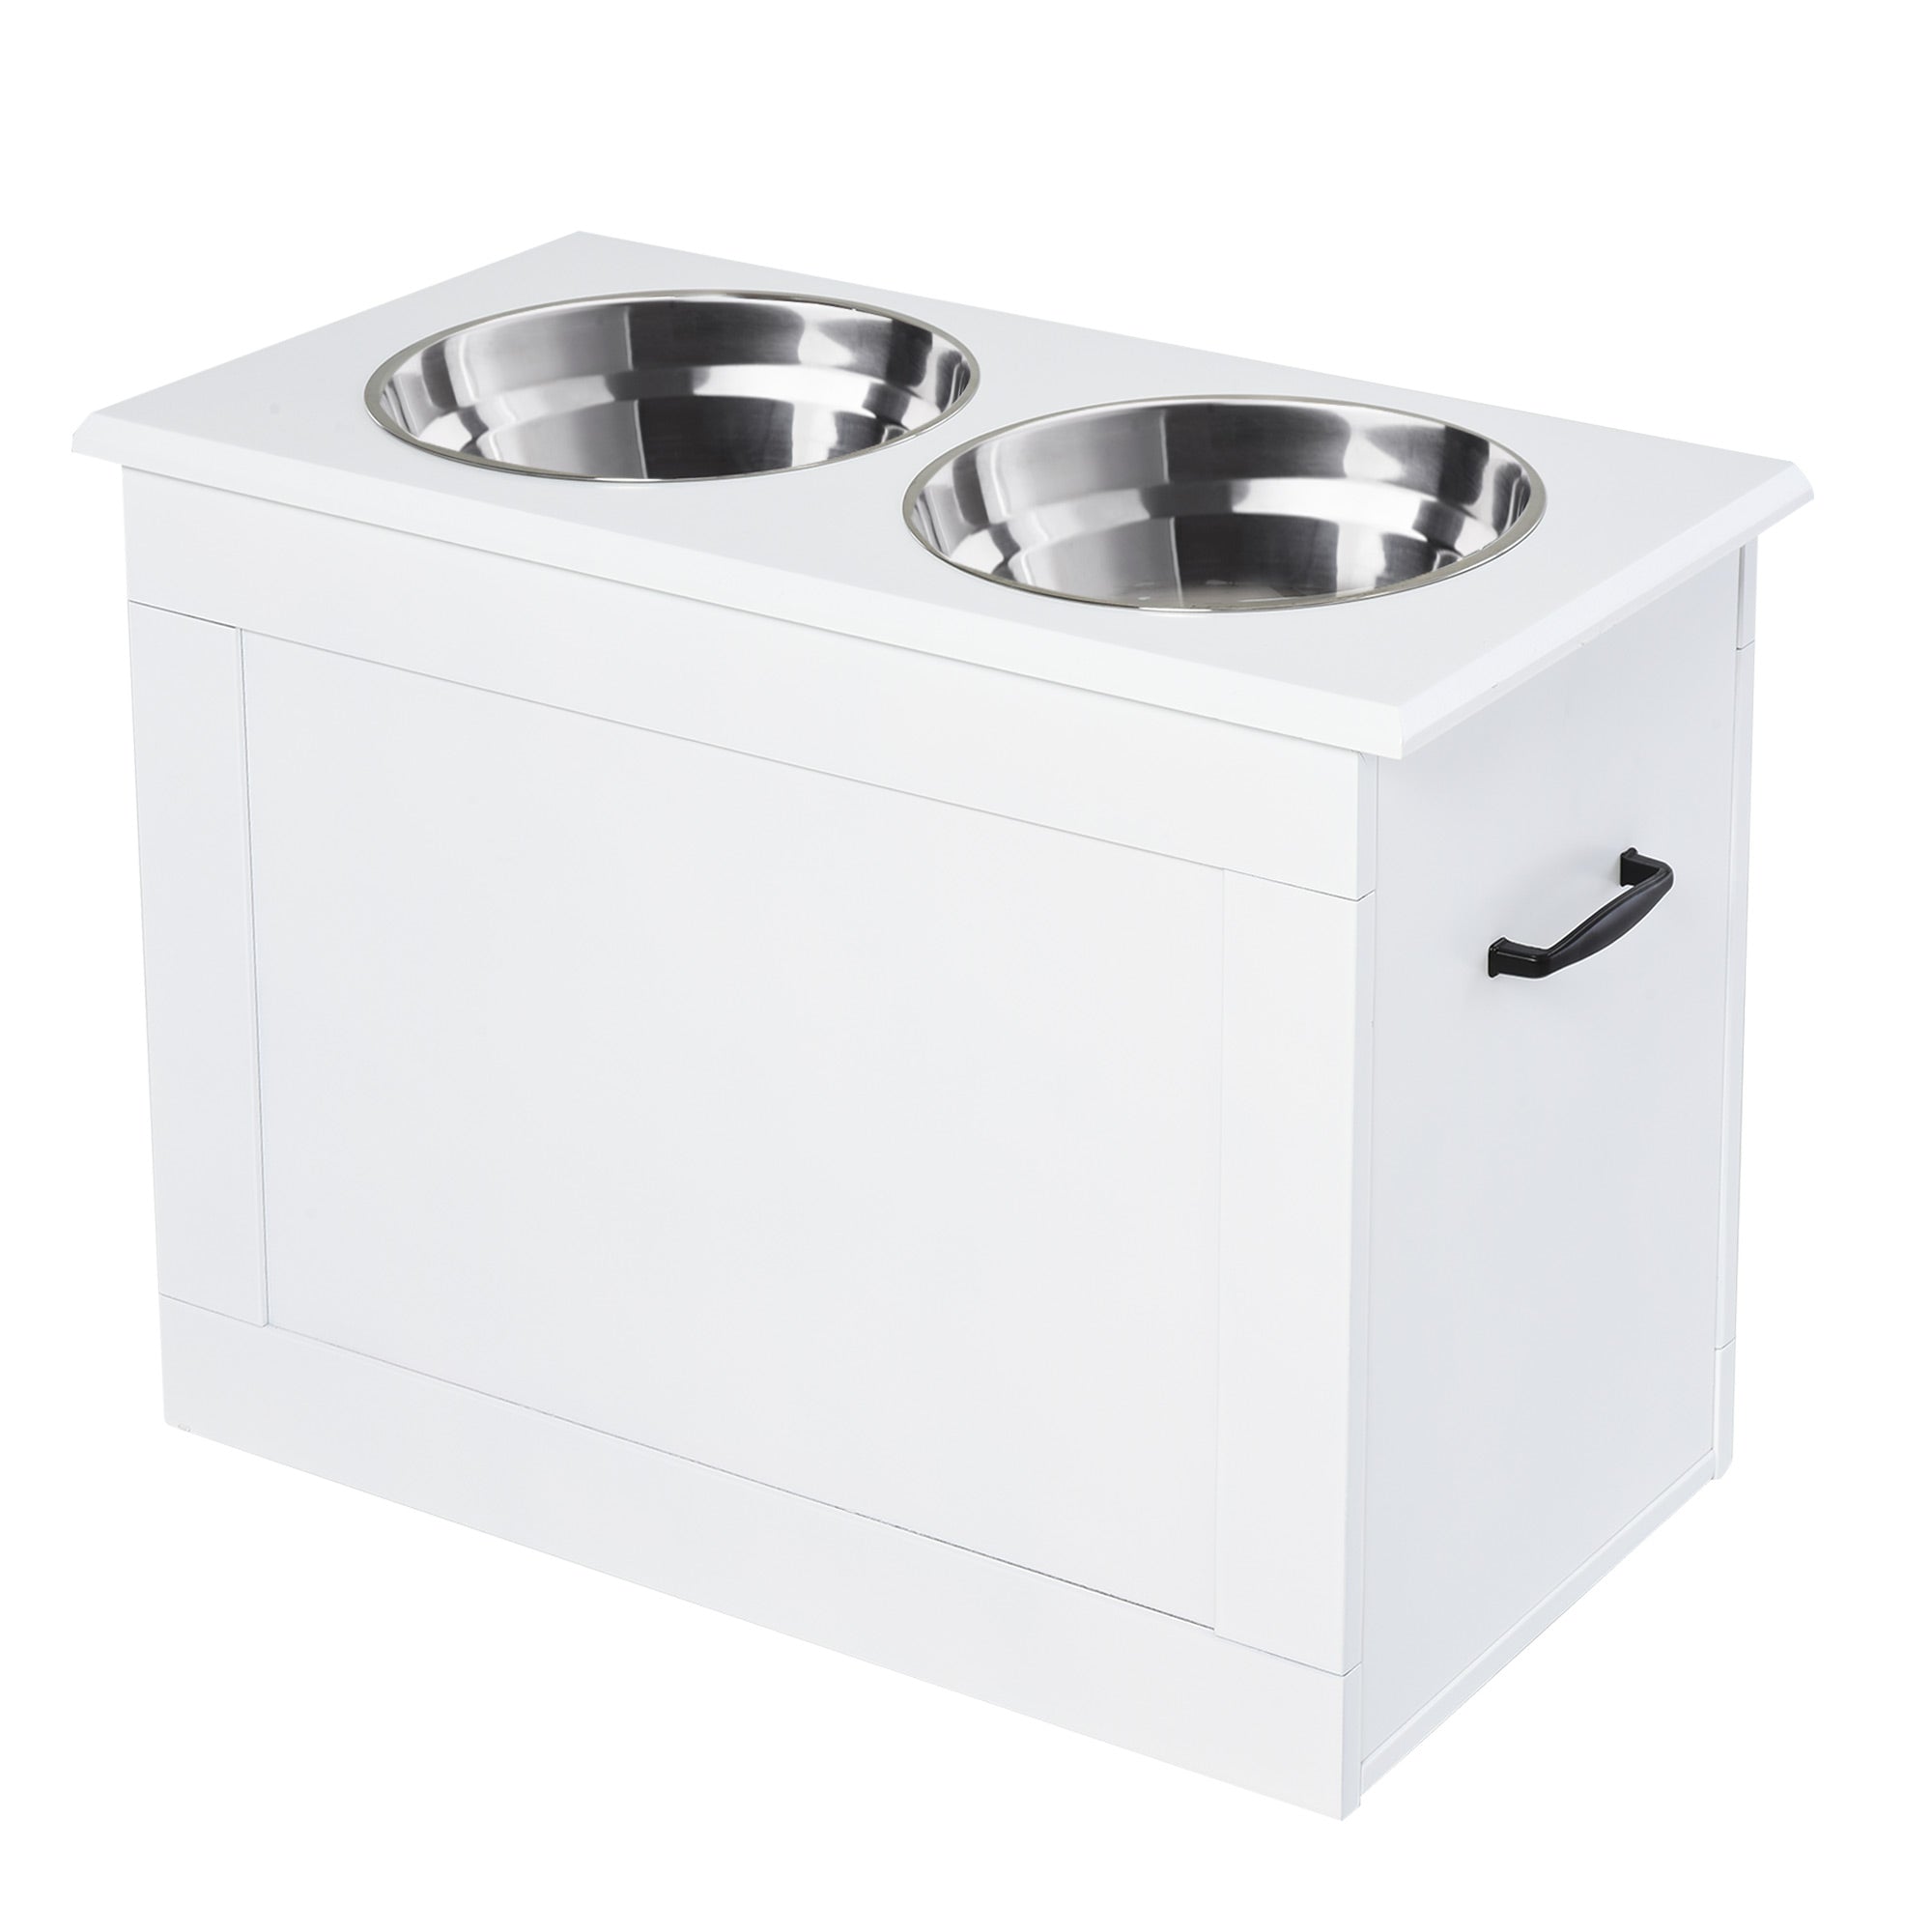 Raised Pet Bowls with Storage Function 2 Stainless Steel Dog Bowls Elevated Base